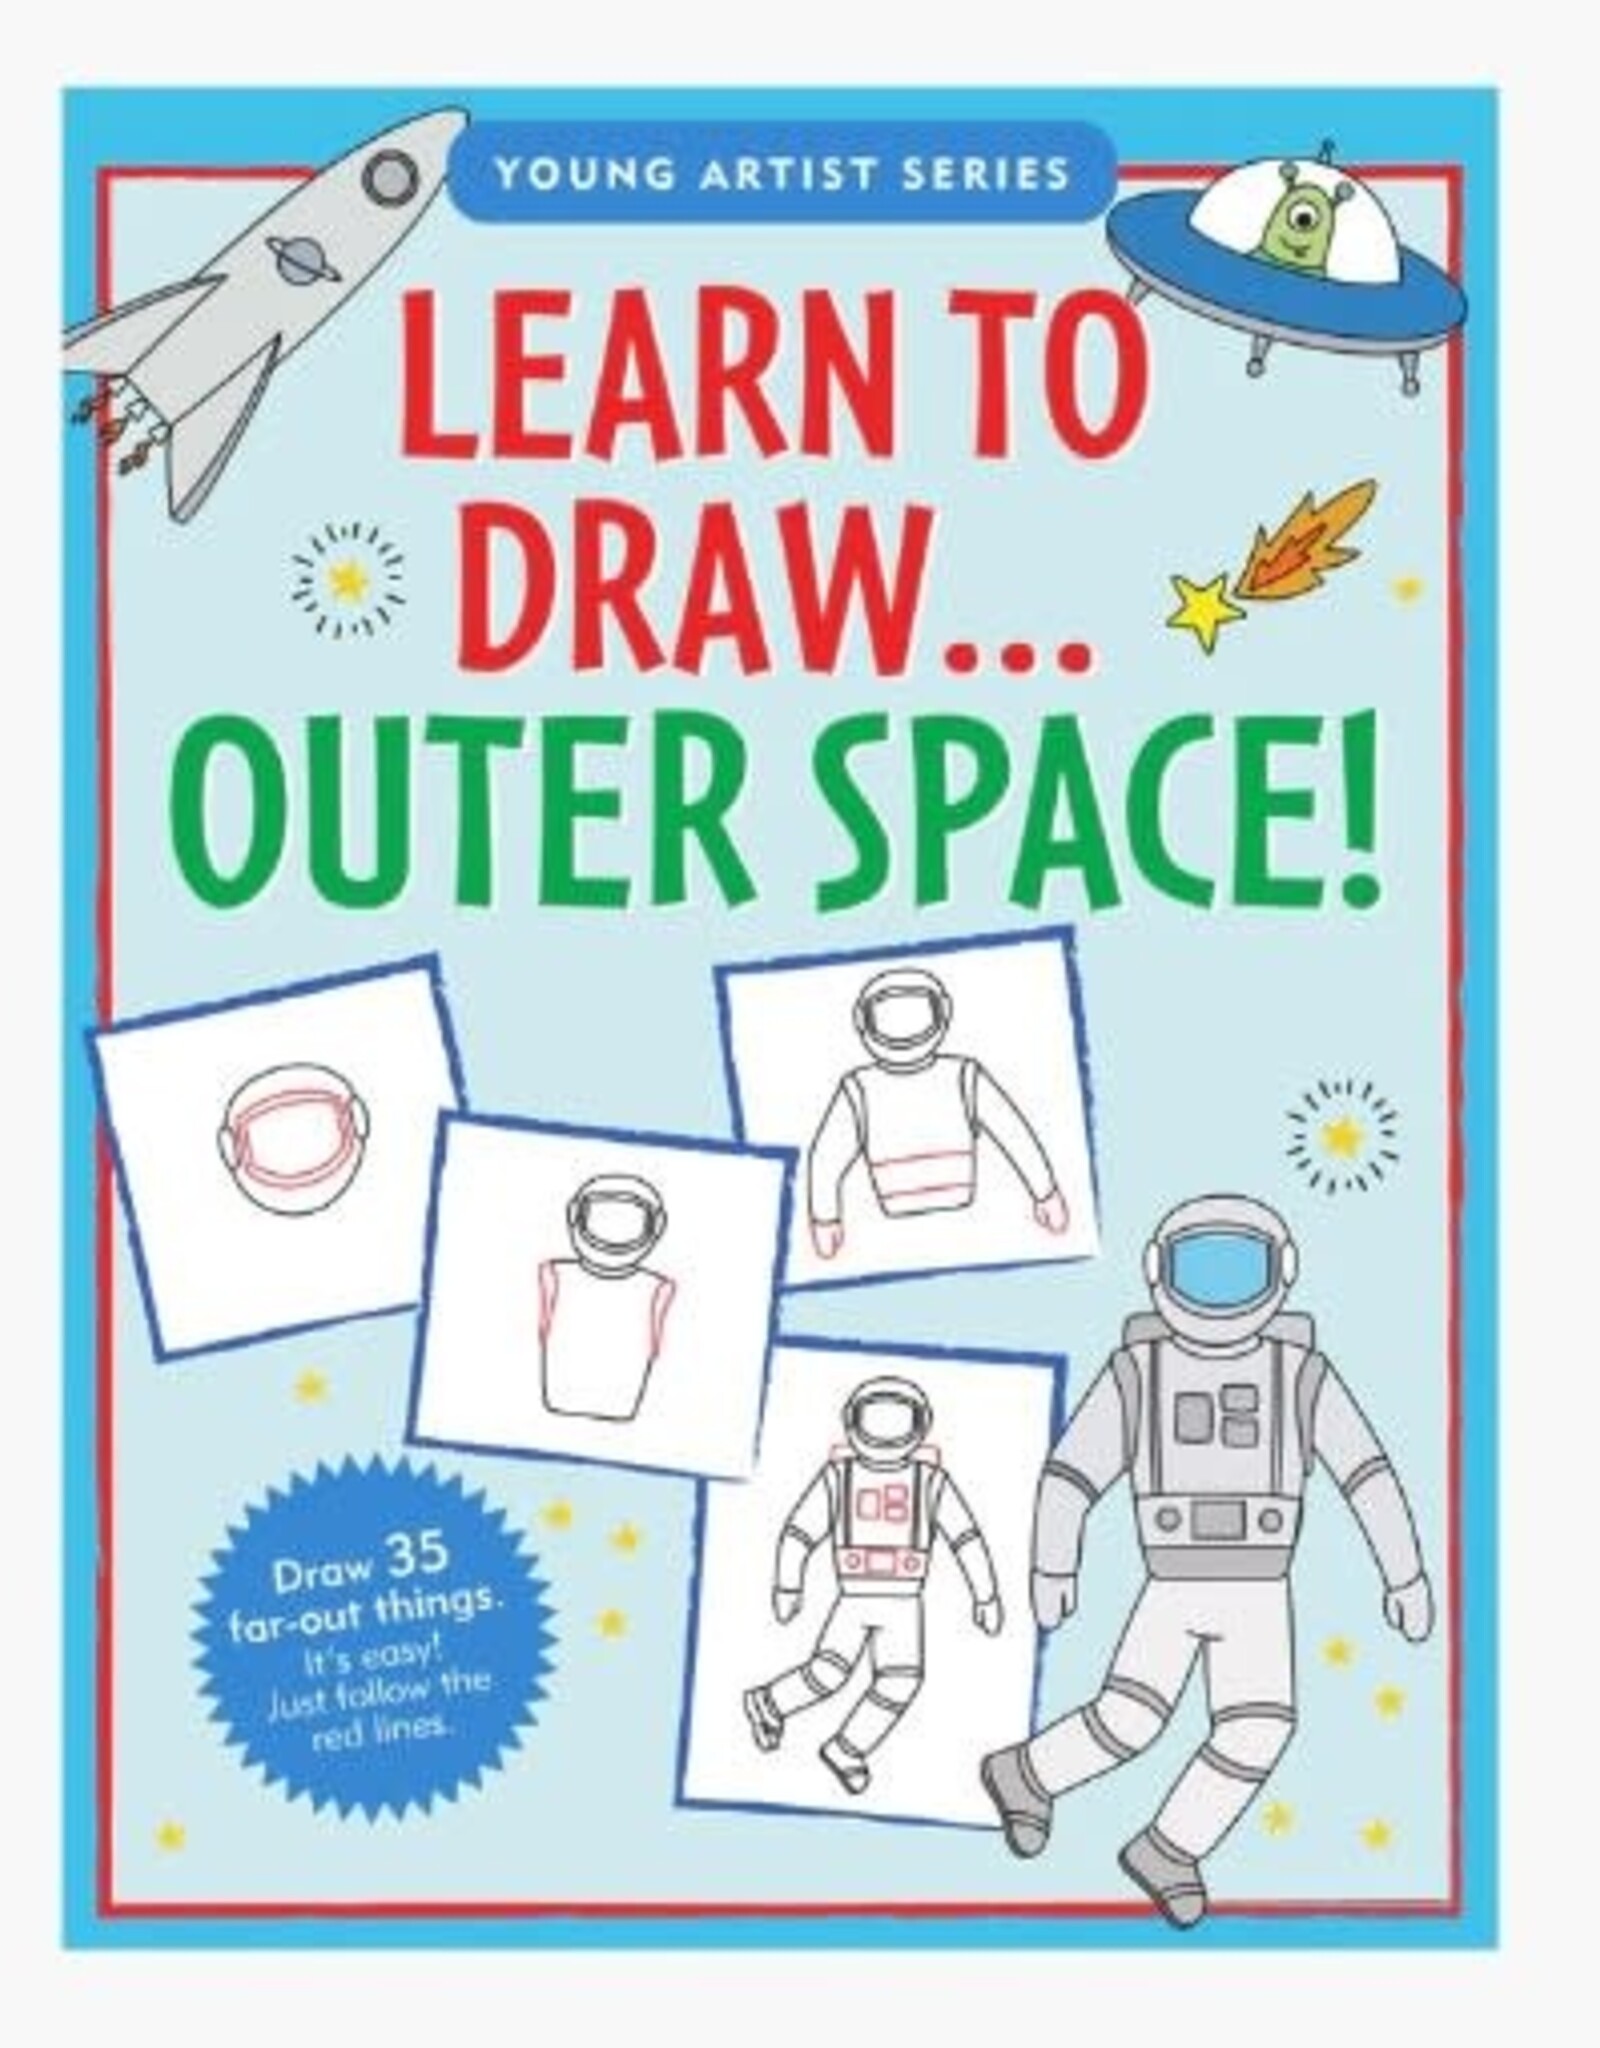 Peter Pauper Press LEARN TO DRAW . . . OUTER SPACE!